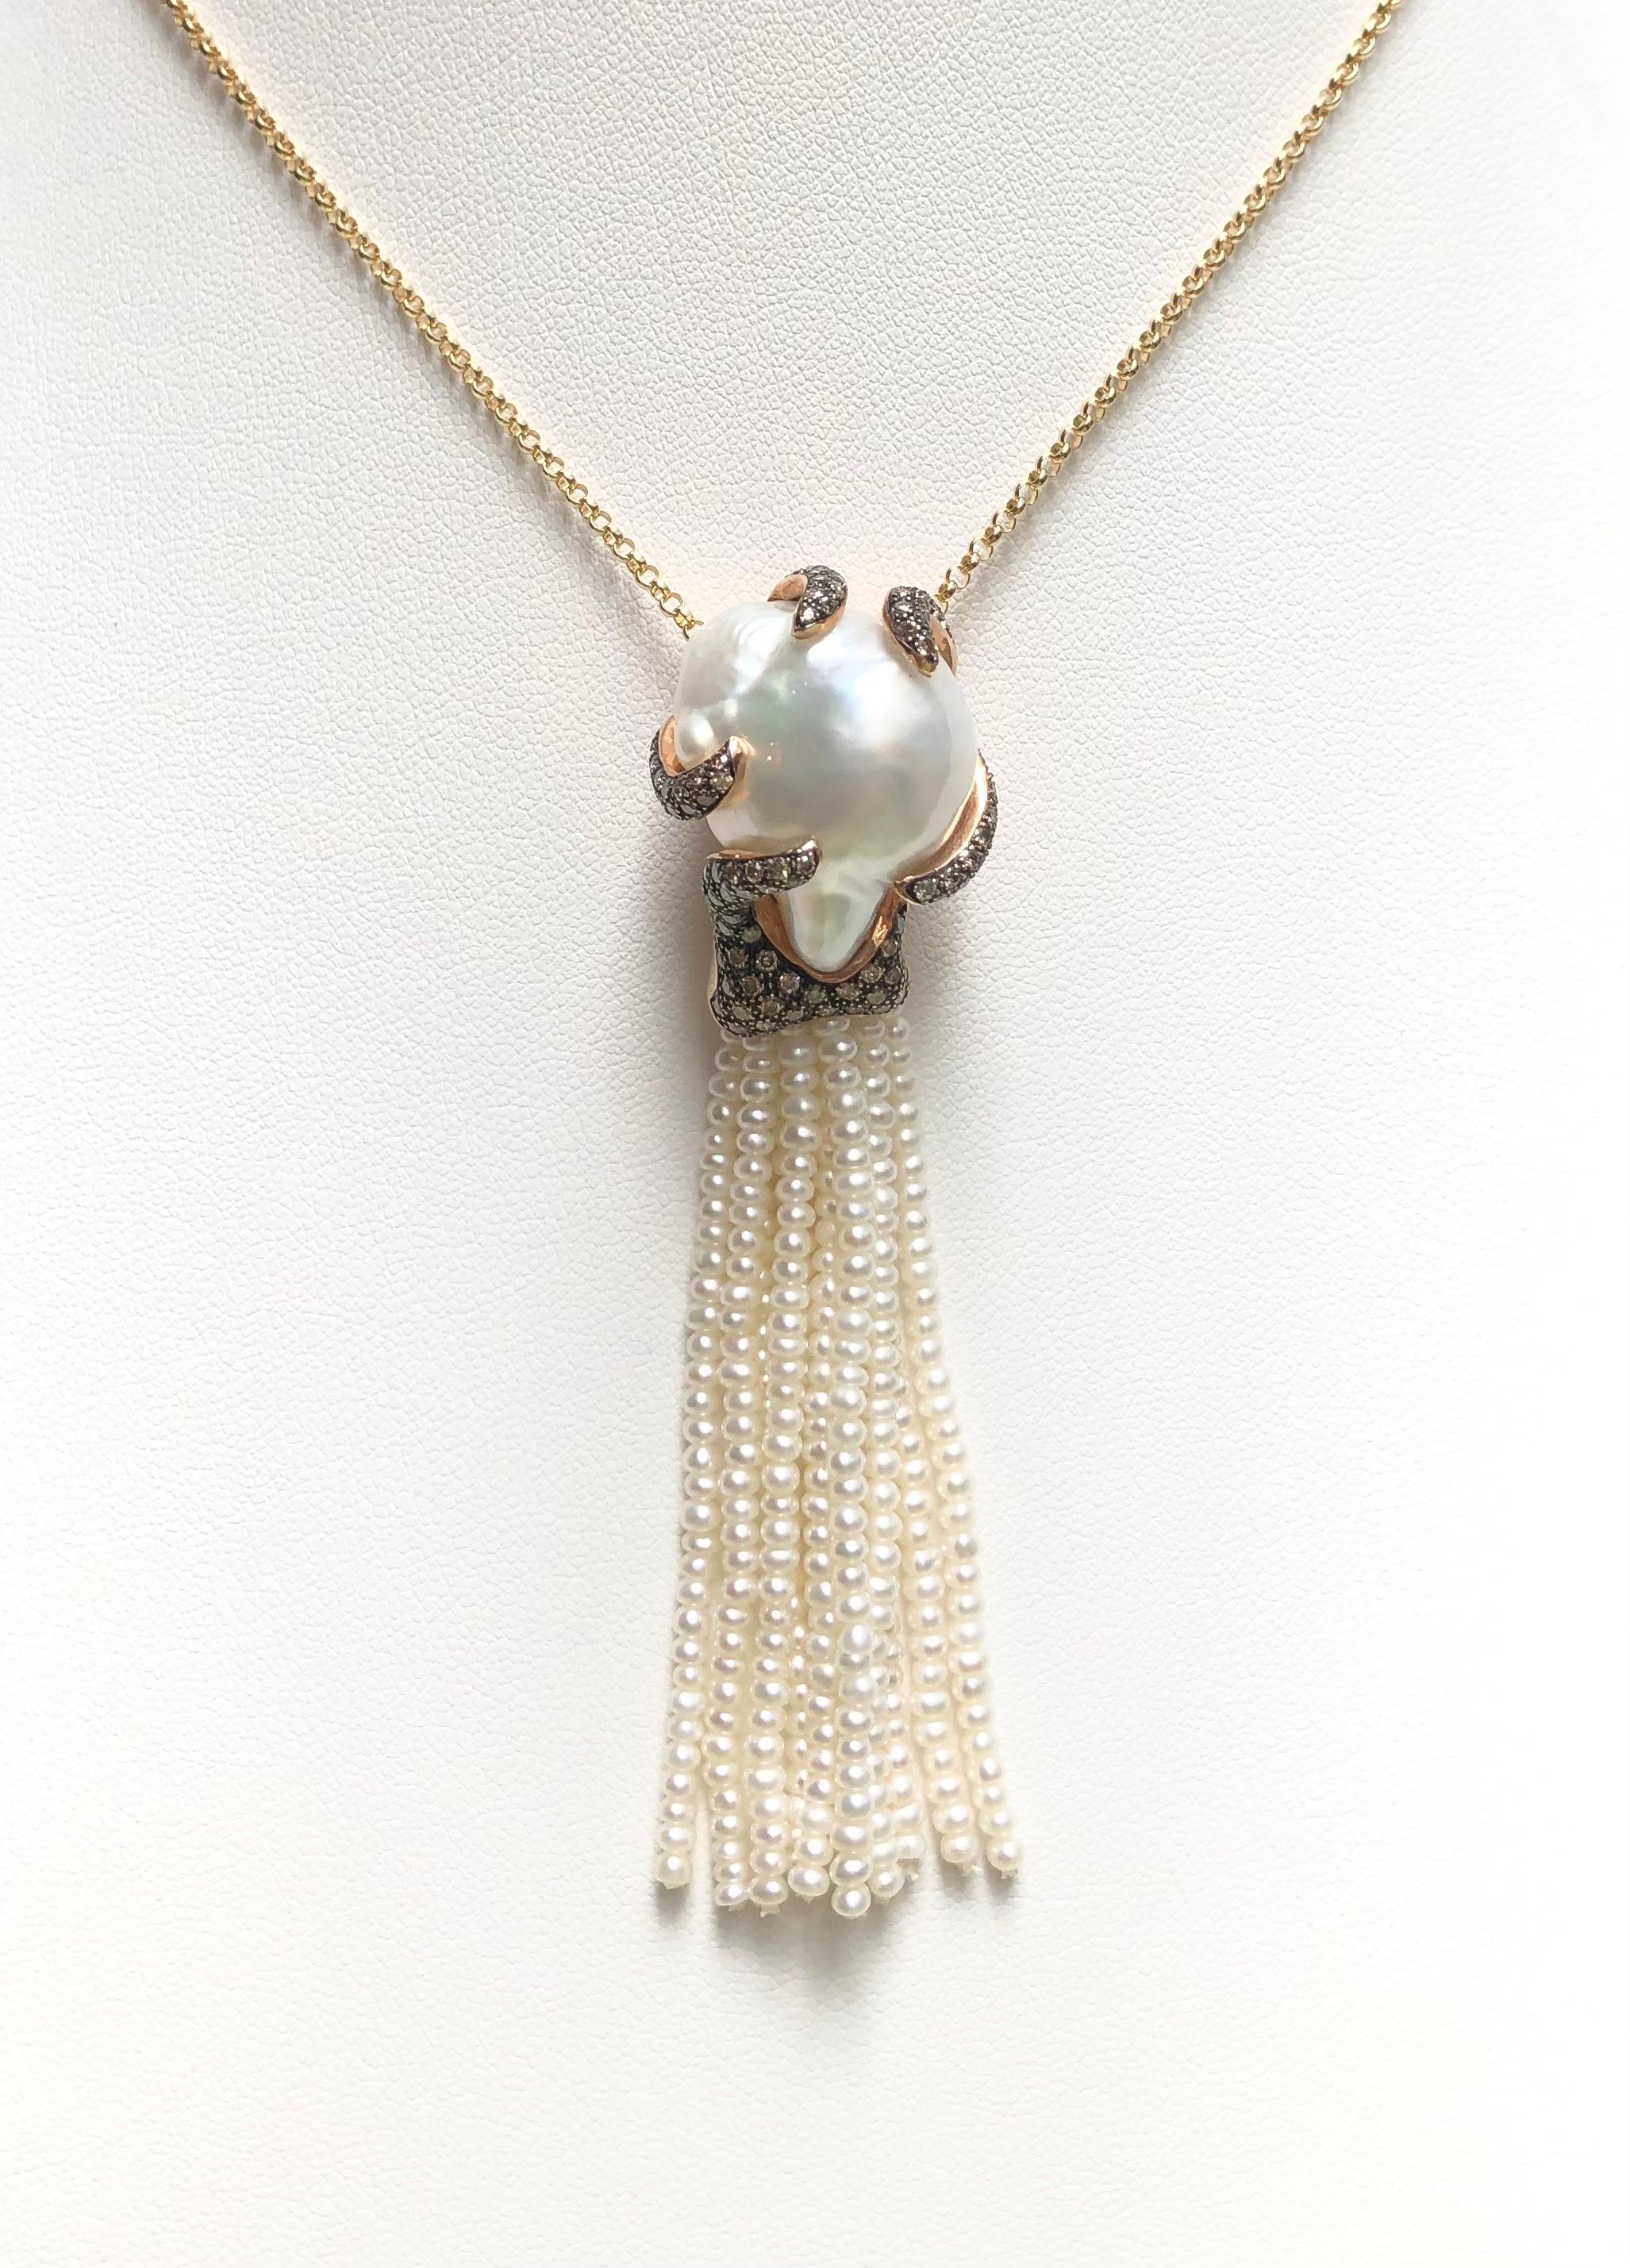 South Sea Pearl, Fresh Water Pearl and Brown Diamond 1.38 carats Pendant set in 18 Karat Rose Gold Settings
(chain not included)

Width: 2.0 cm 
Length: 8.0 cm
Total Weight: 21.78 grams

